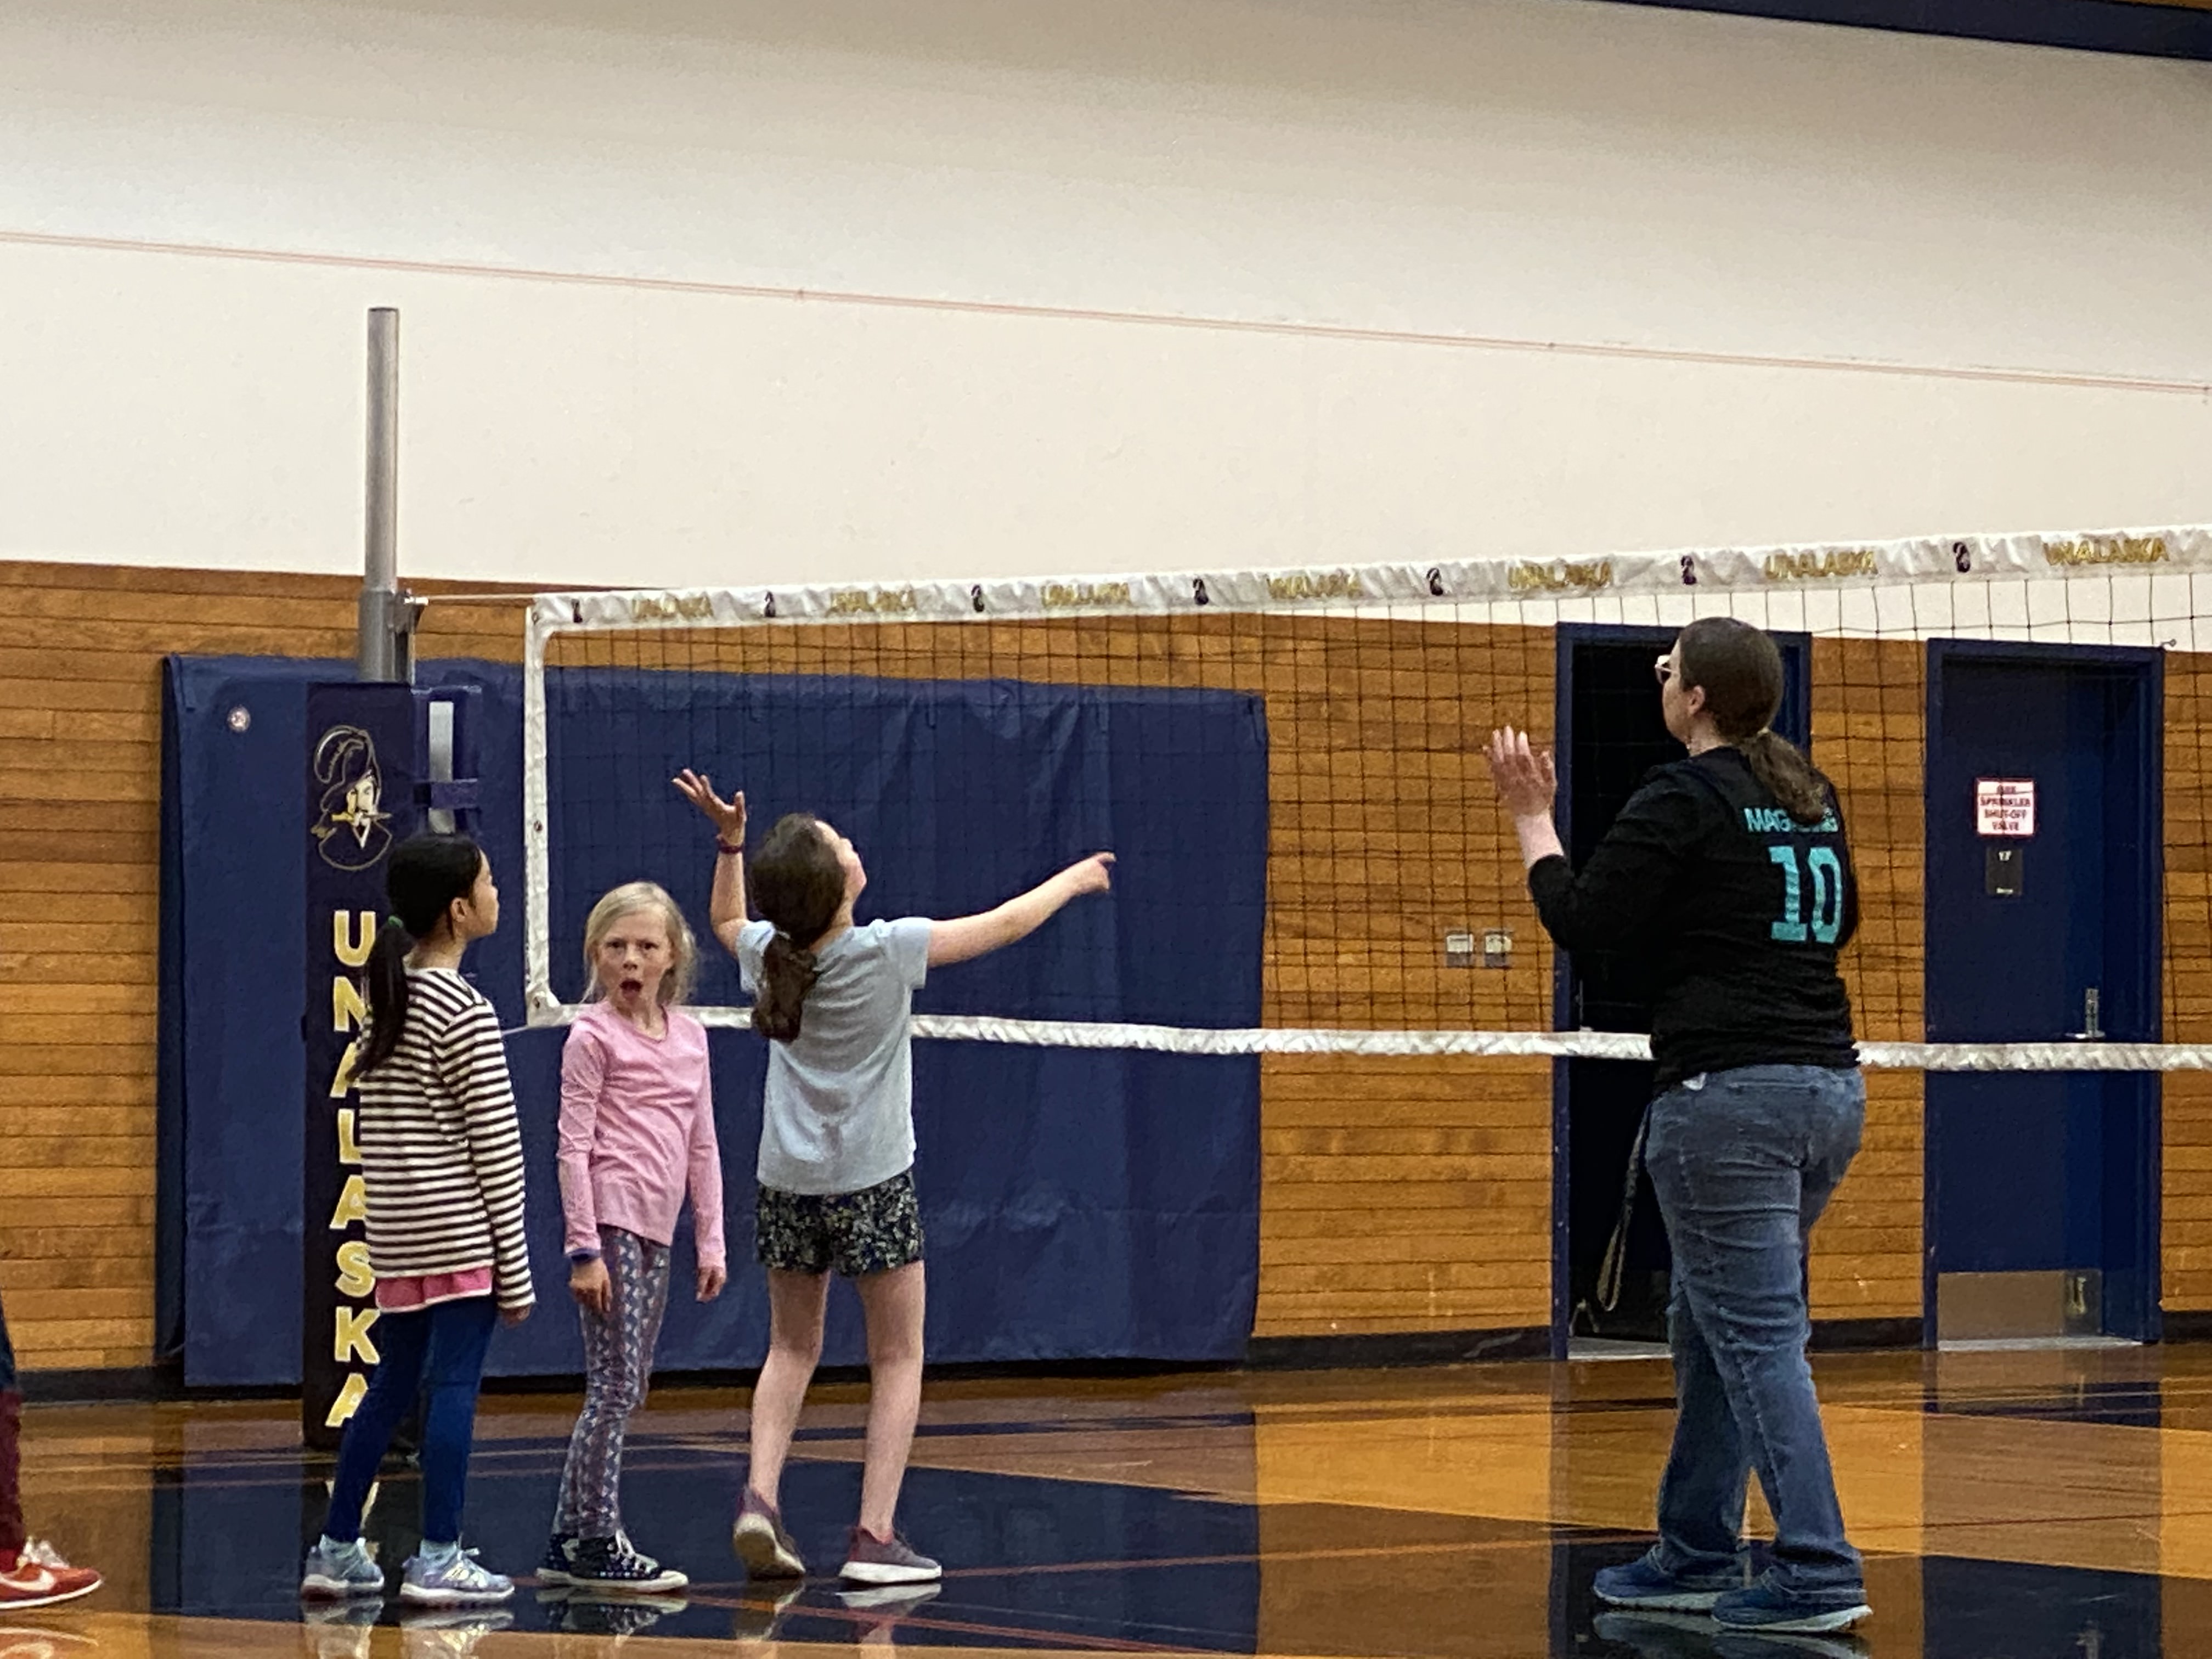 Youth Volleyball Camp